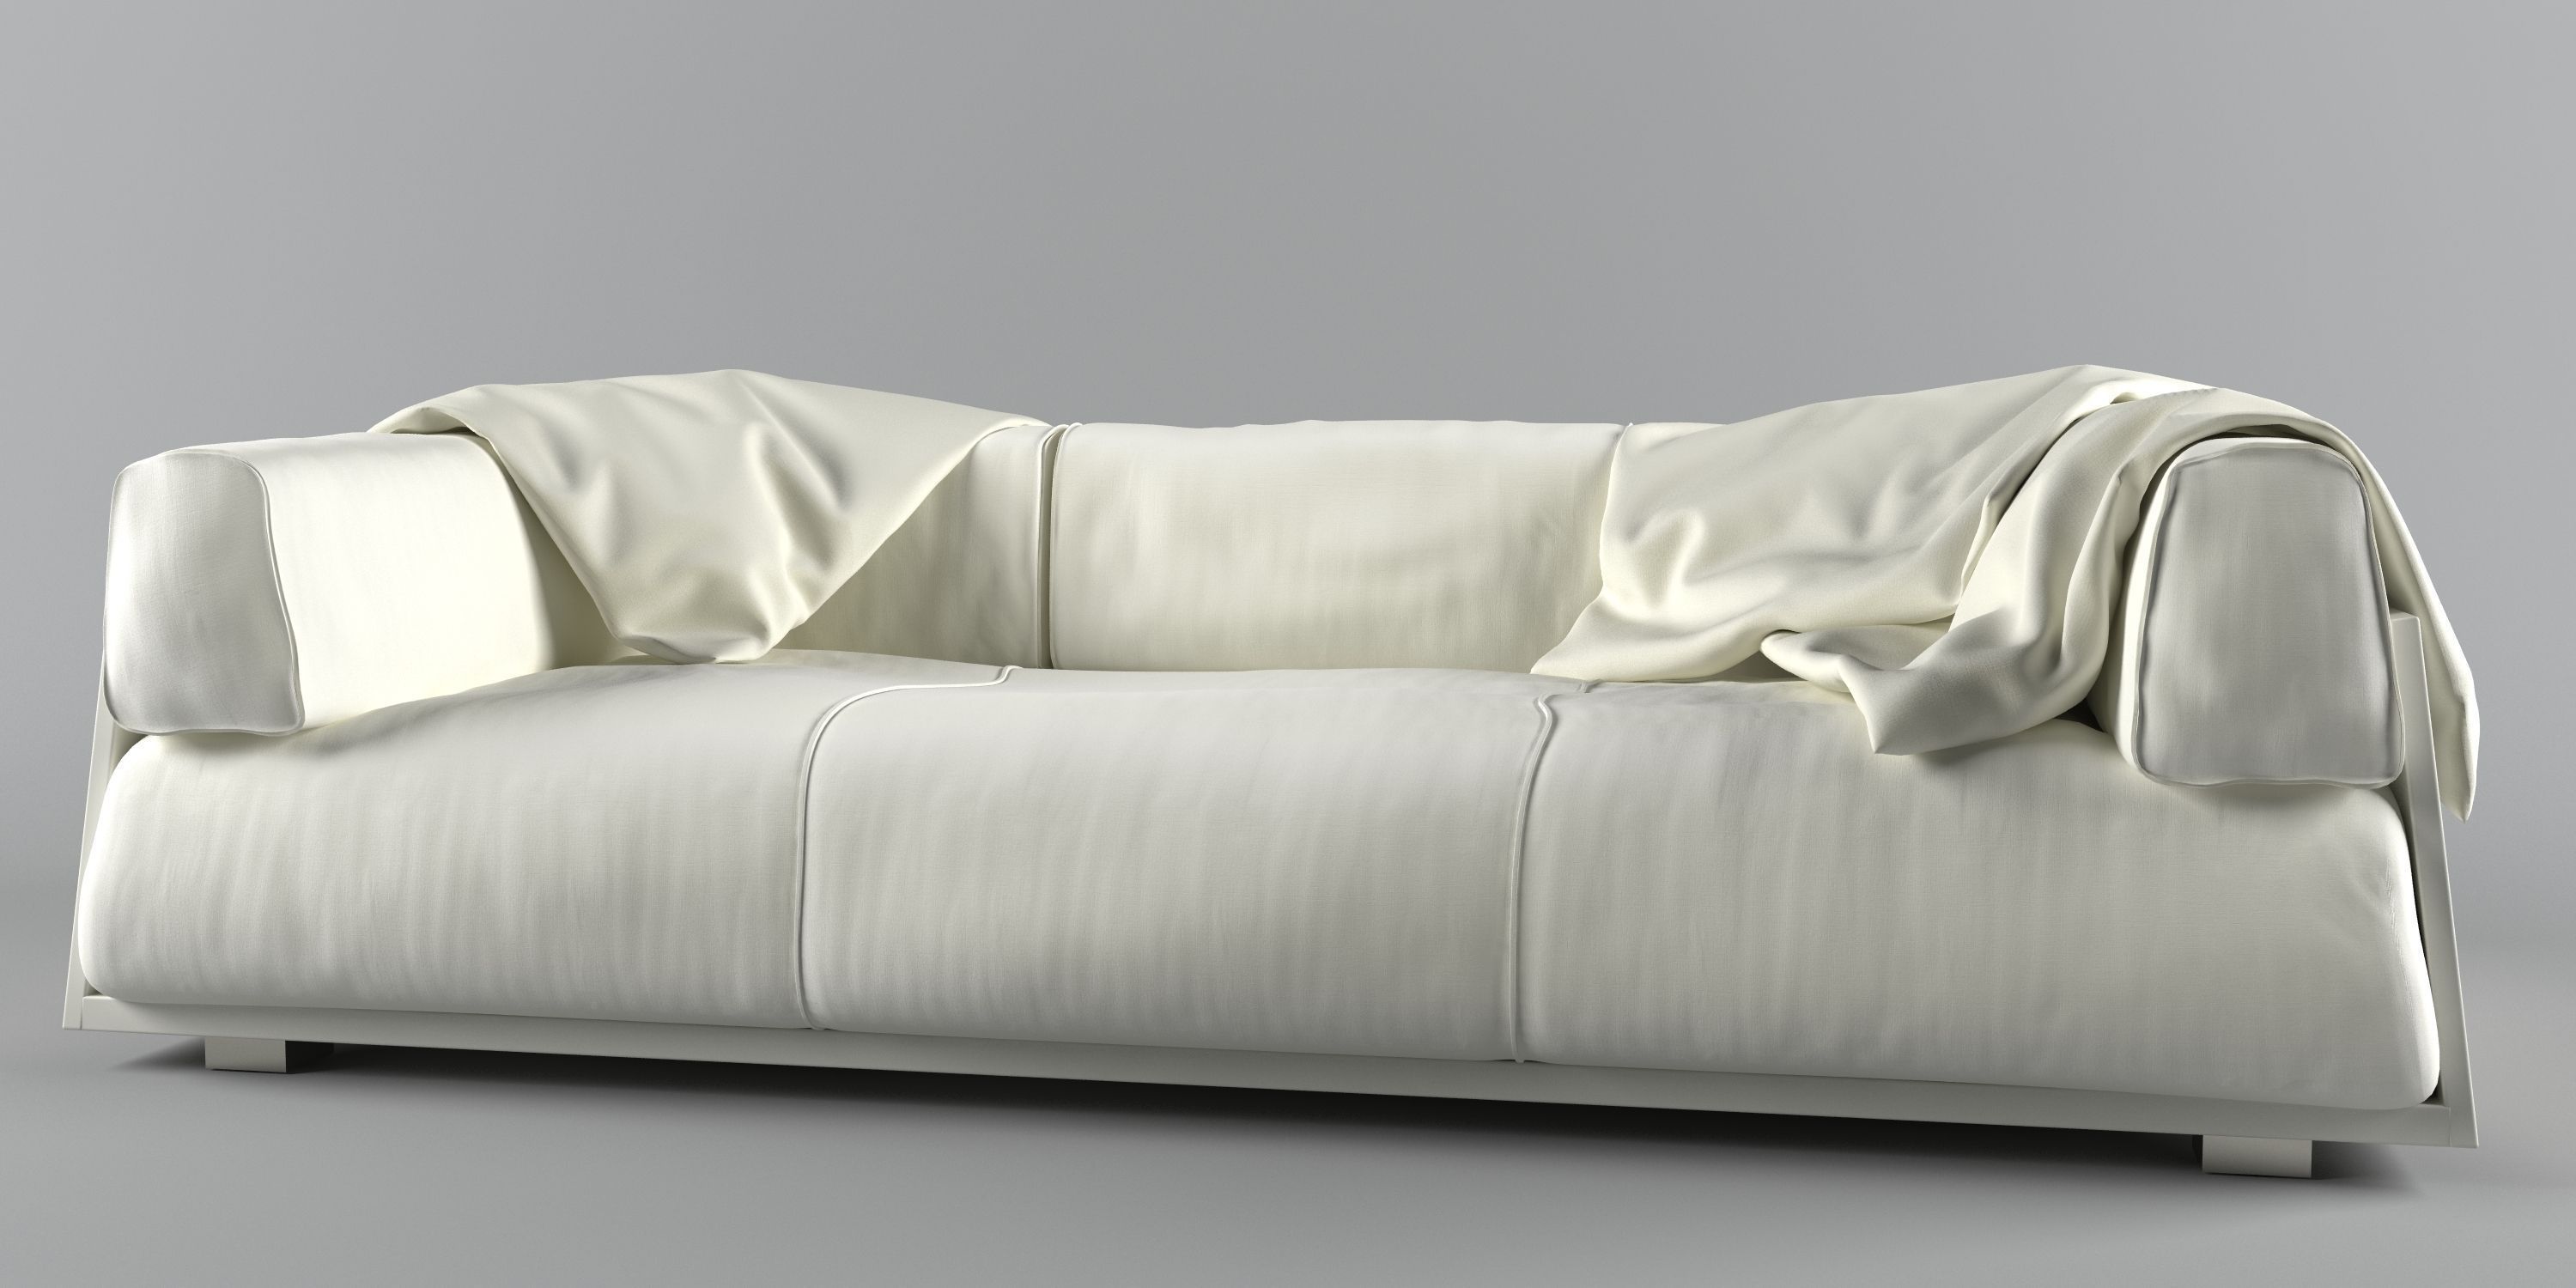 Beautiful Soft Sofa 24 For Sofas And Couches Ideas With Soft Sofa Intended For Soft Sofas (View 9 of 10)